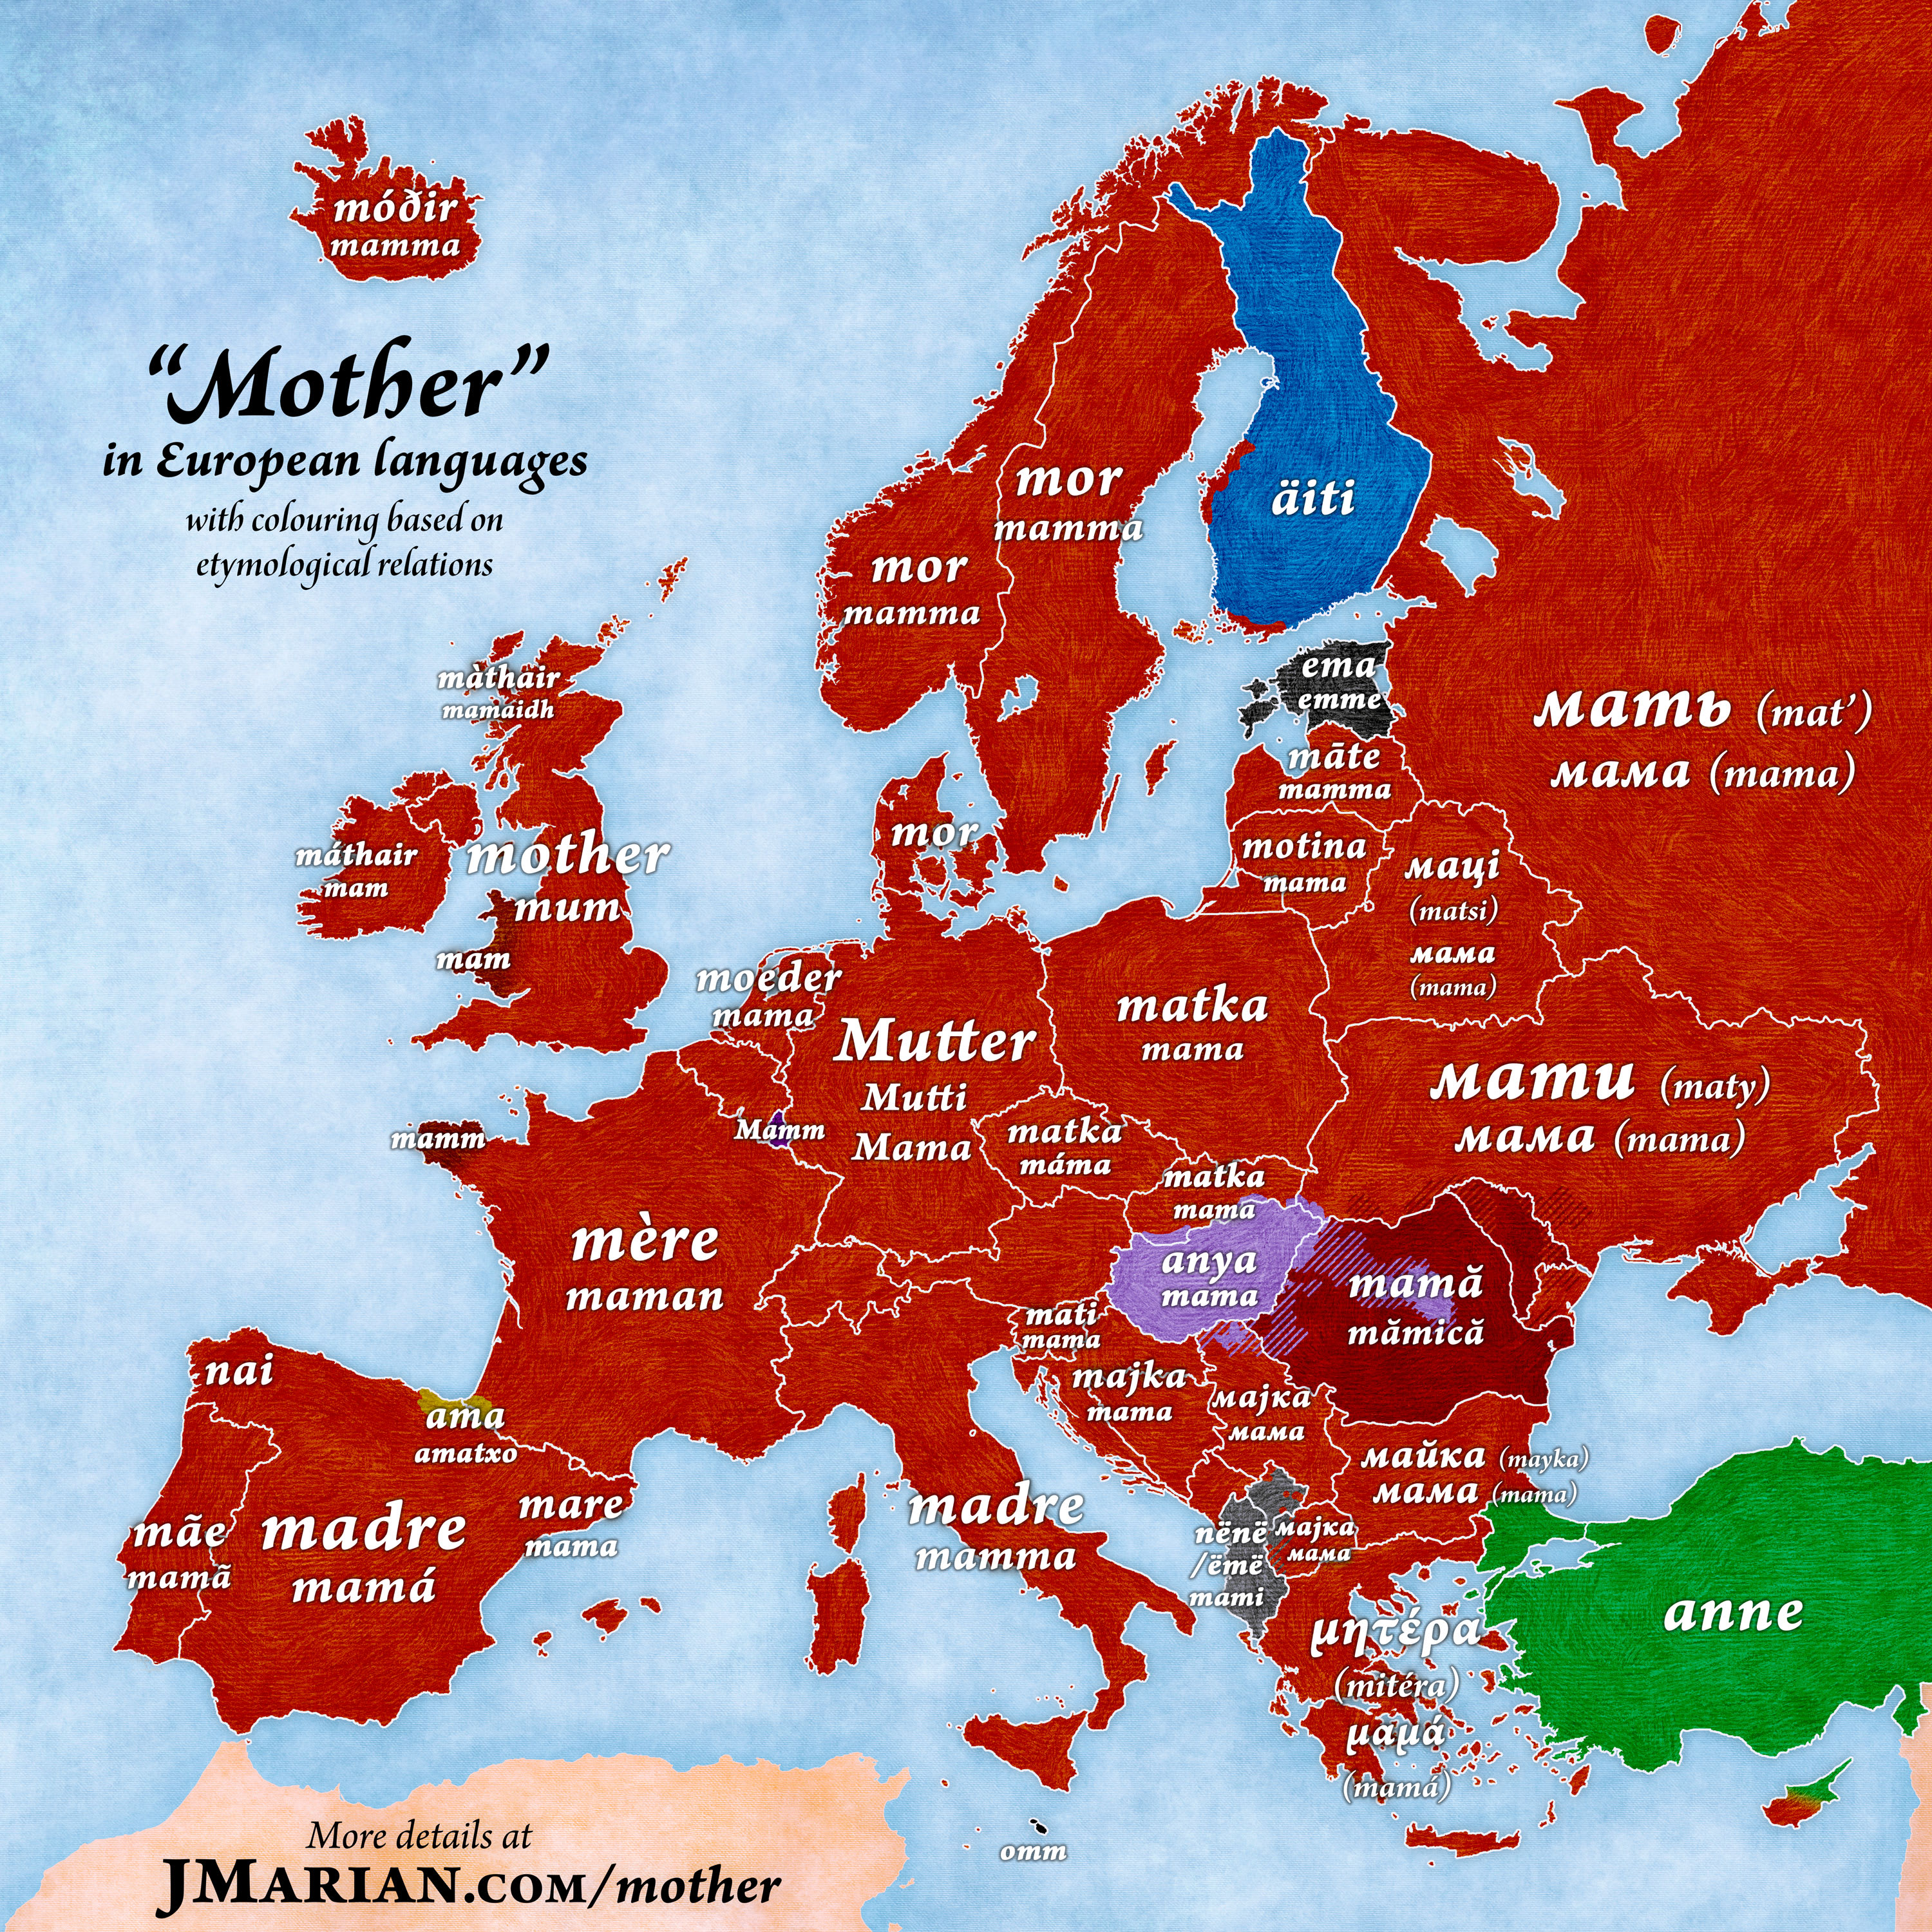 Mother in European languages